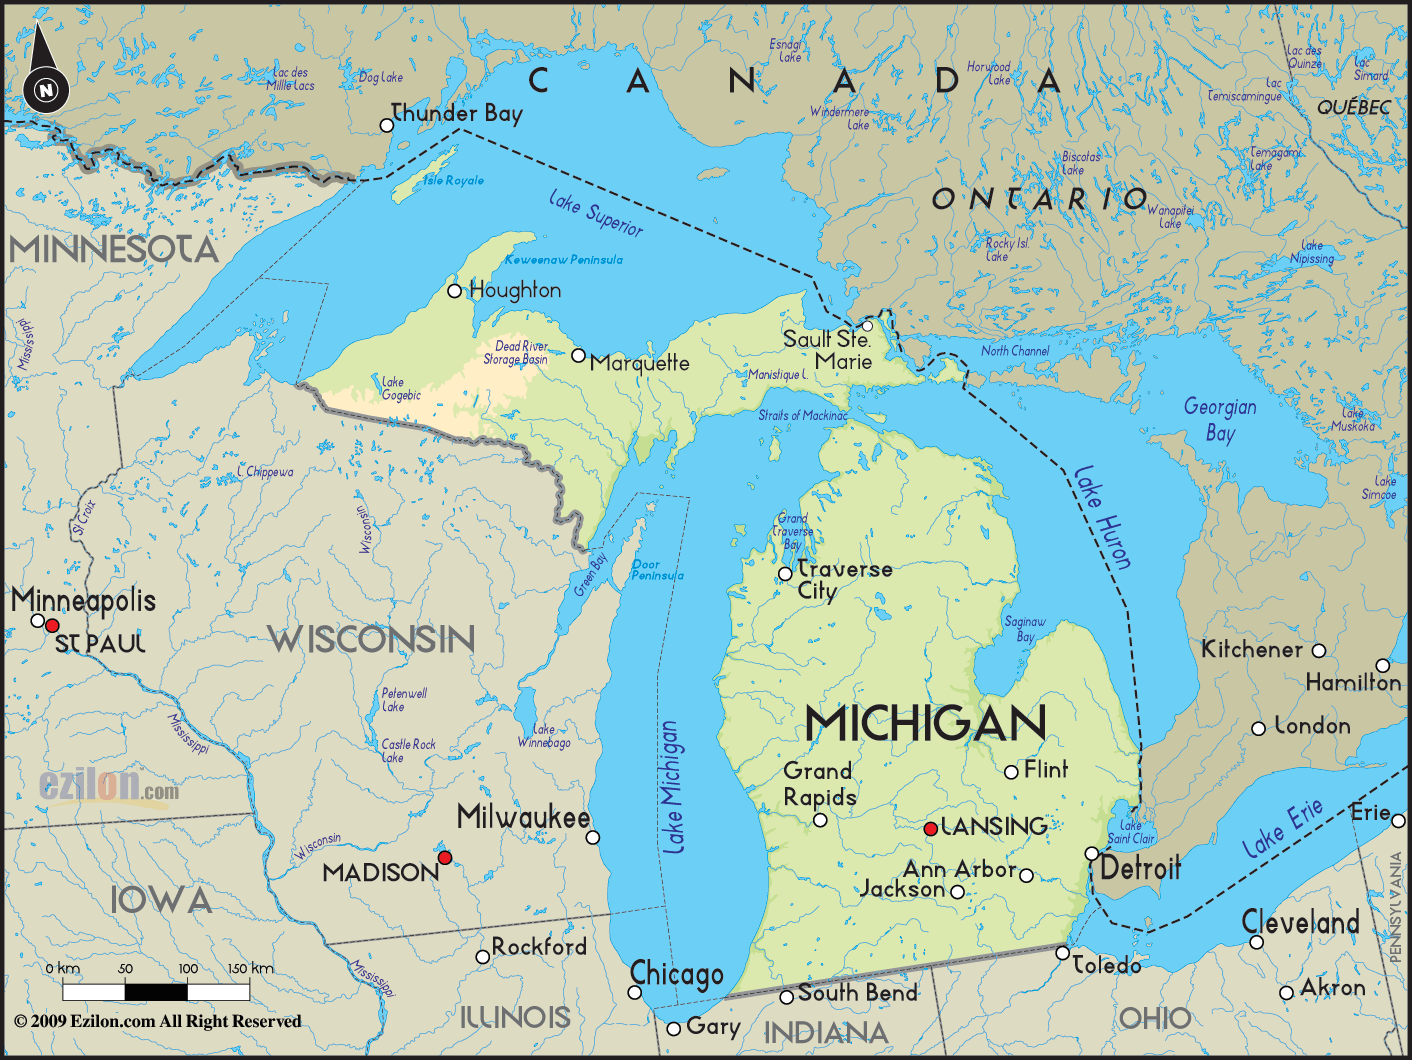 Geographical Map Of Michigan And Michigan Geographical Maps